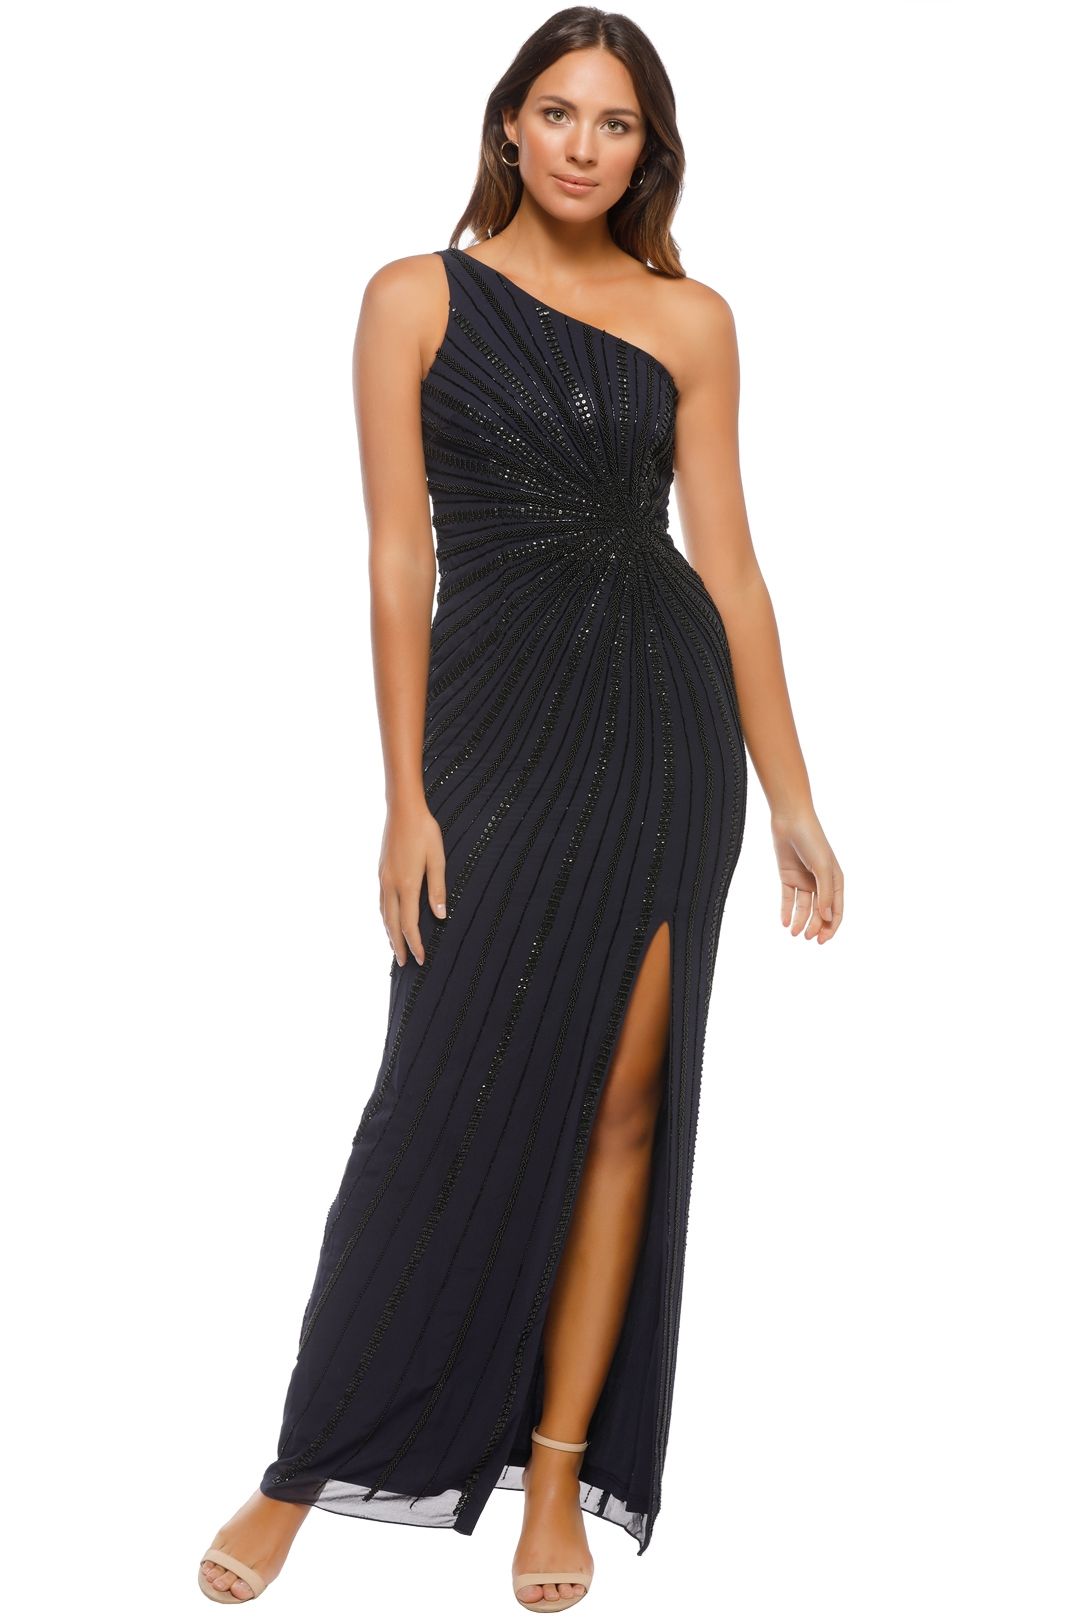 Adrianna Papell - One Shoulder Long Dress - Front